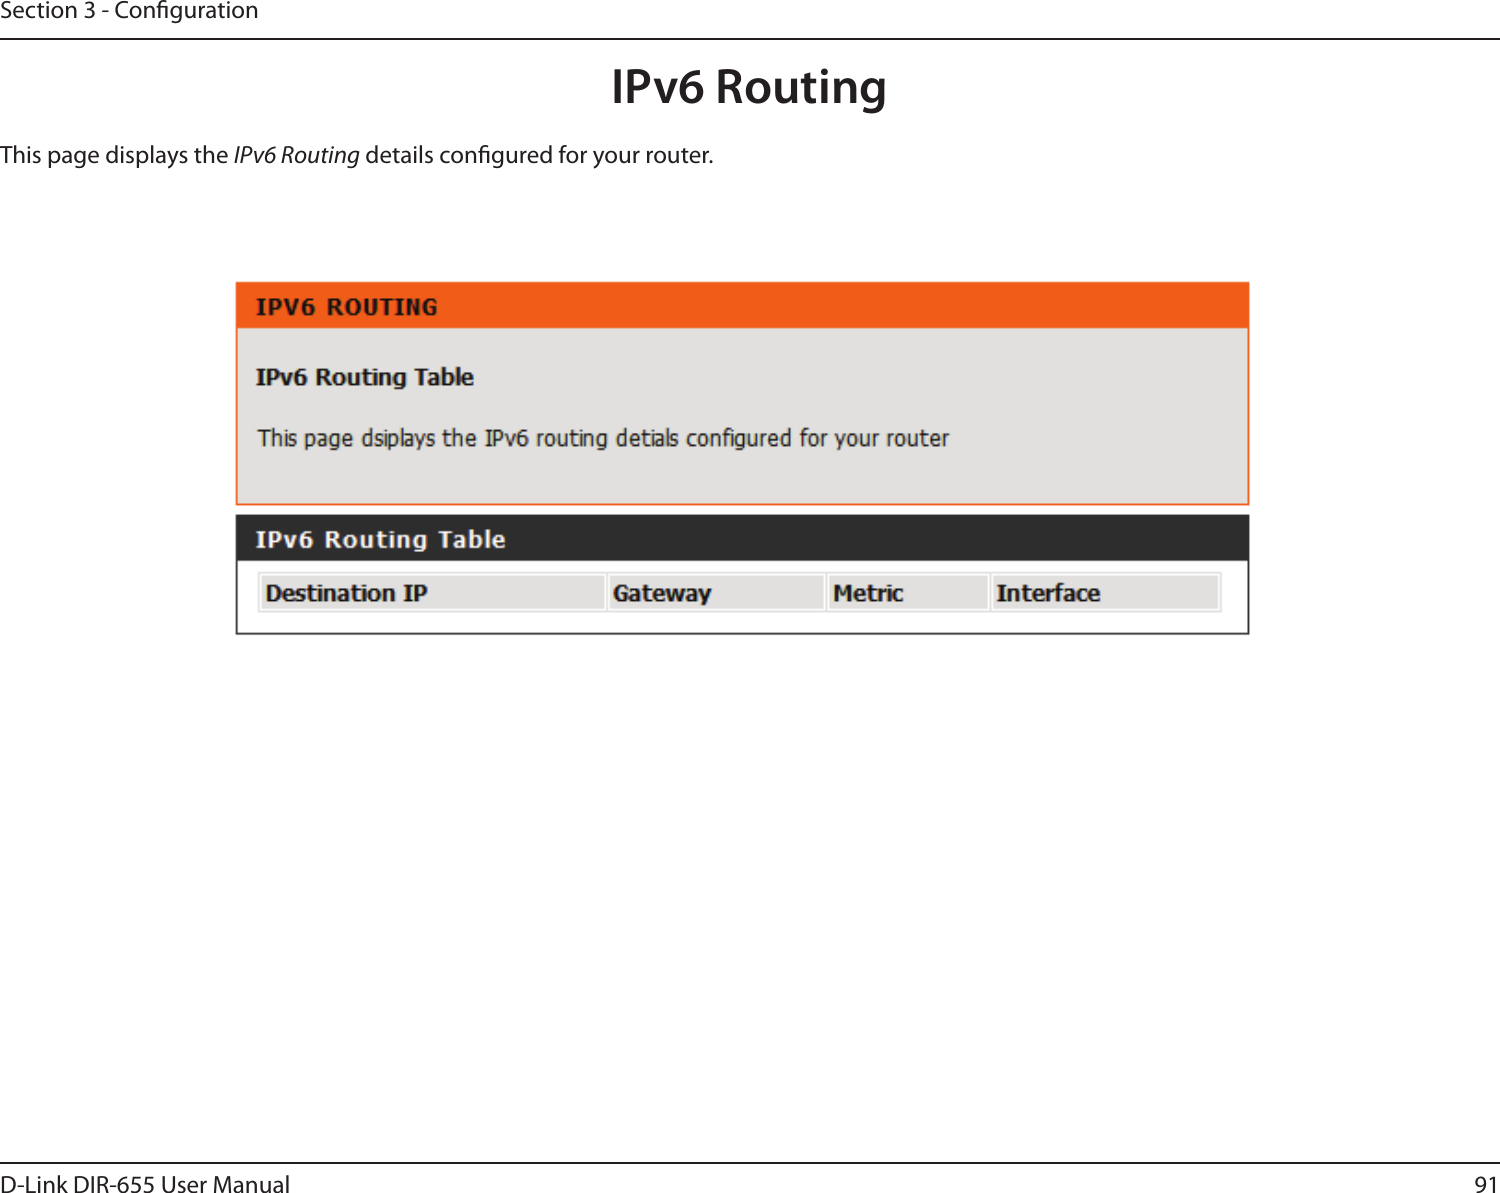 91D-Link DIR-655 User ManualSection 3 - CongurationIPv6 RoutingThis page displays the IPv6 Routing details congured for your router. 